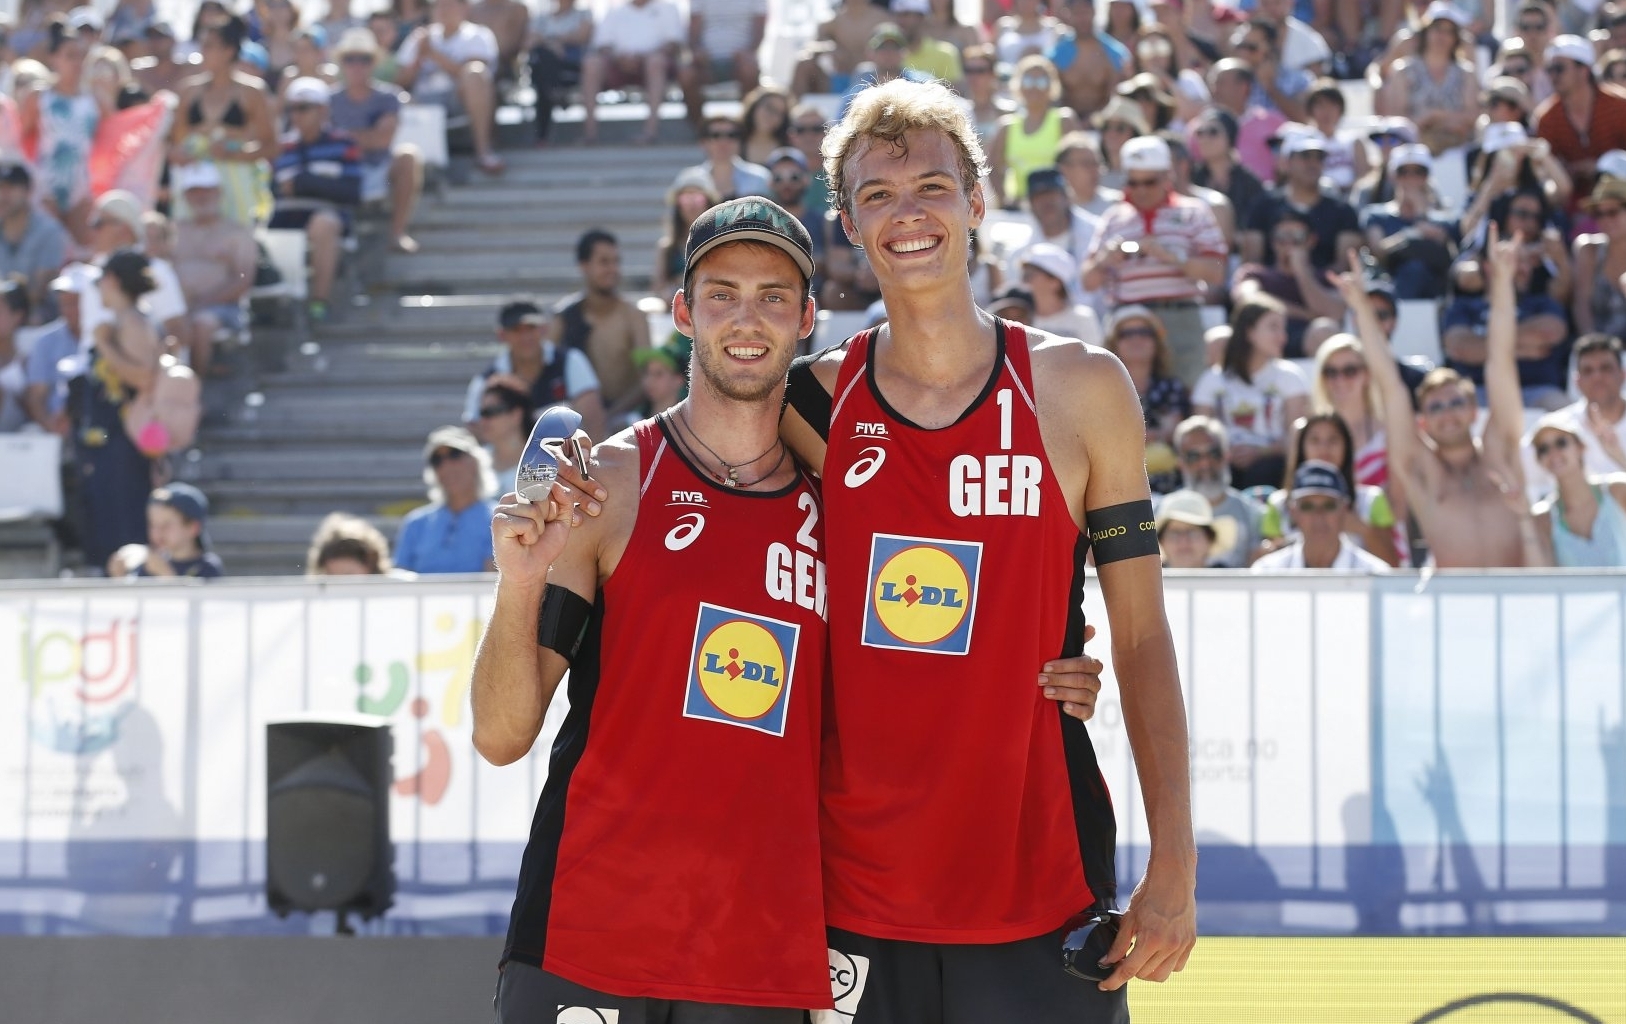 Wickler and Thole won their first-ever World Tour medals in Espinho (Photocredit: FIVB)